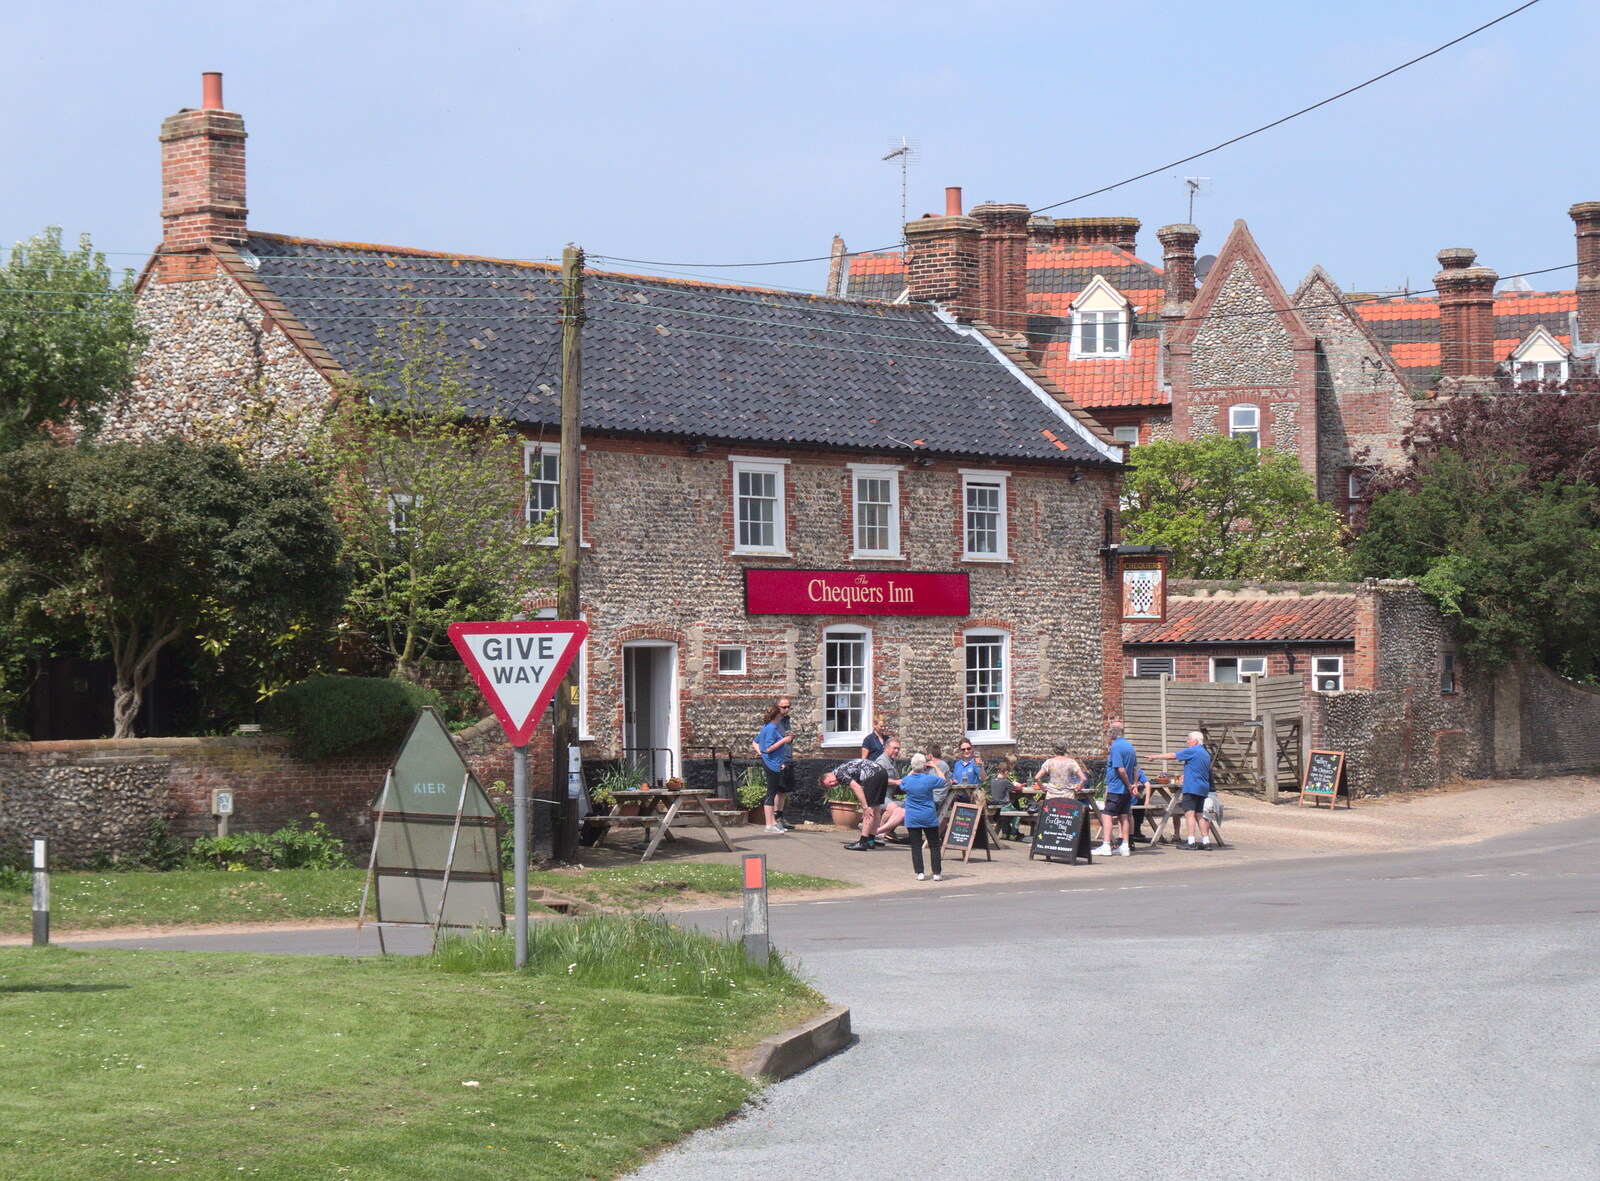 A view of the Chequers Inn from across the road from The BSCC Weekend Away, Holt, Norfolk - 12th May 2018